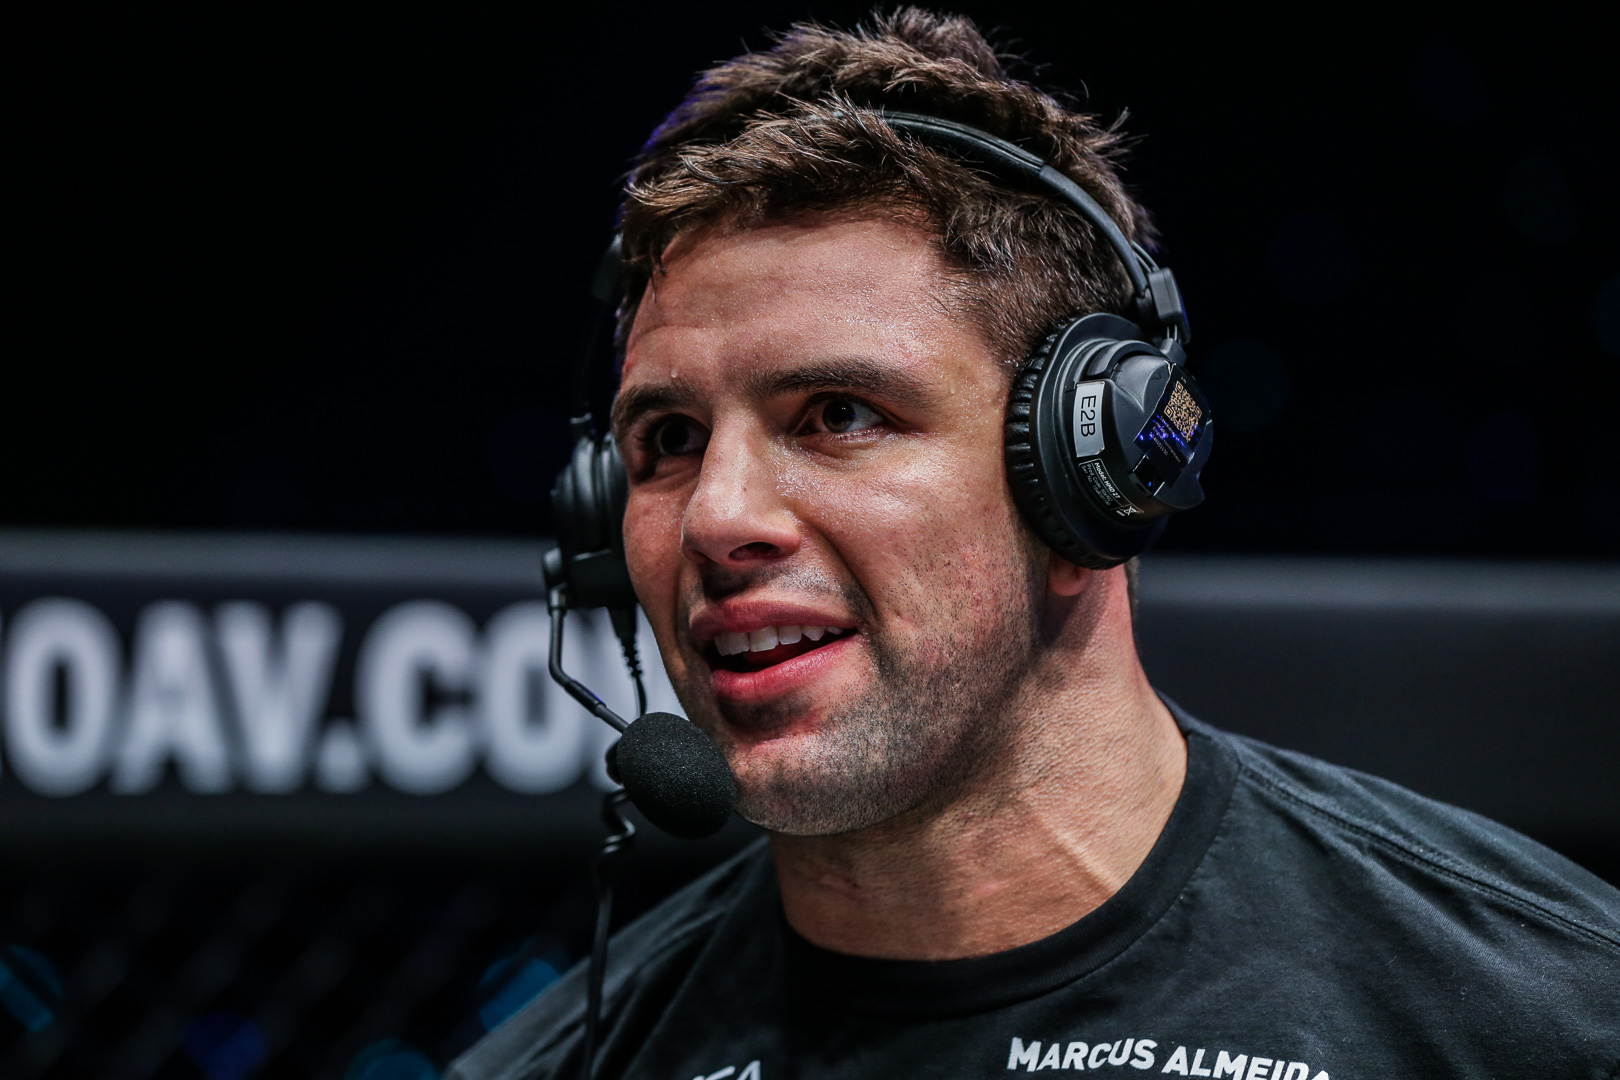 Buchecha discusses his victory at ONE: WINTER WARRIORS.